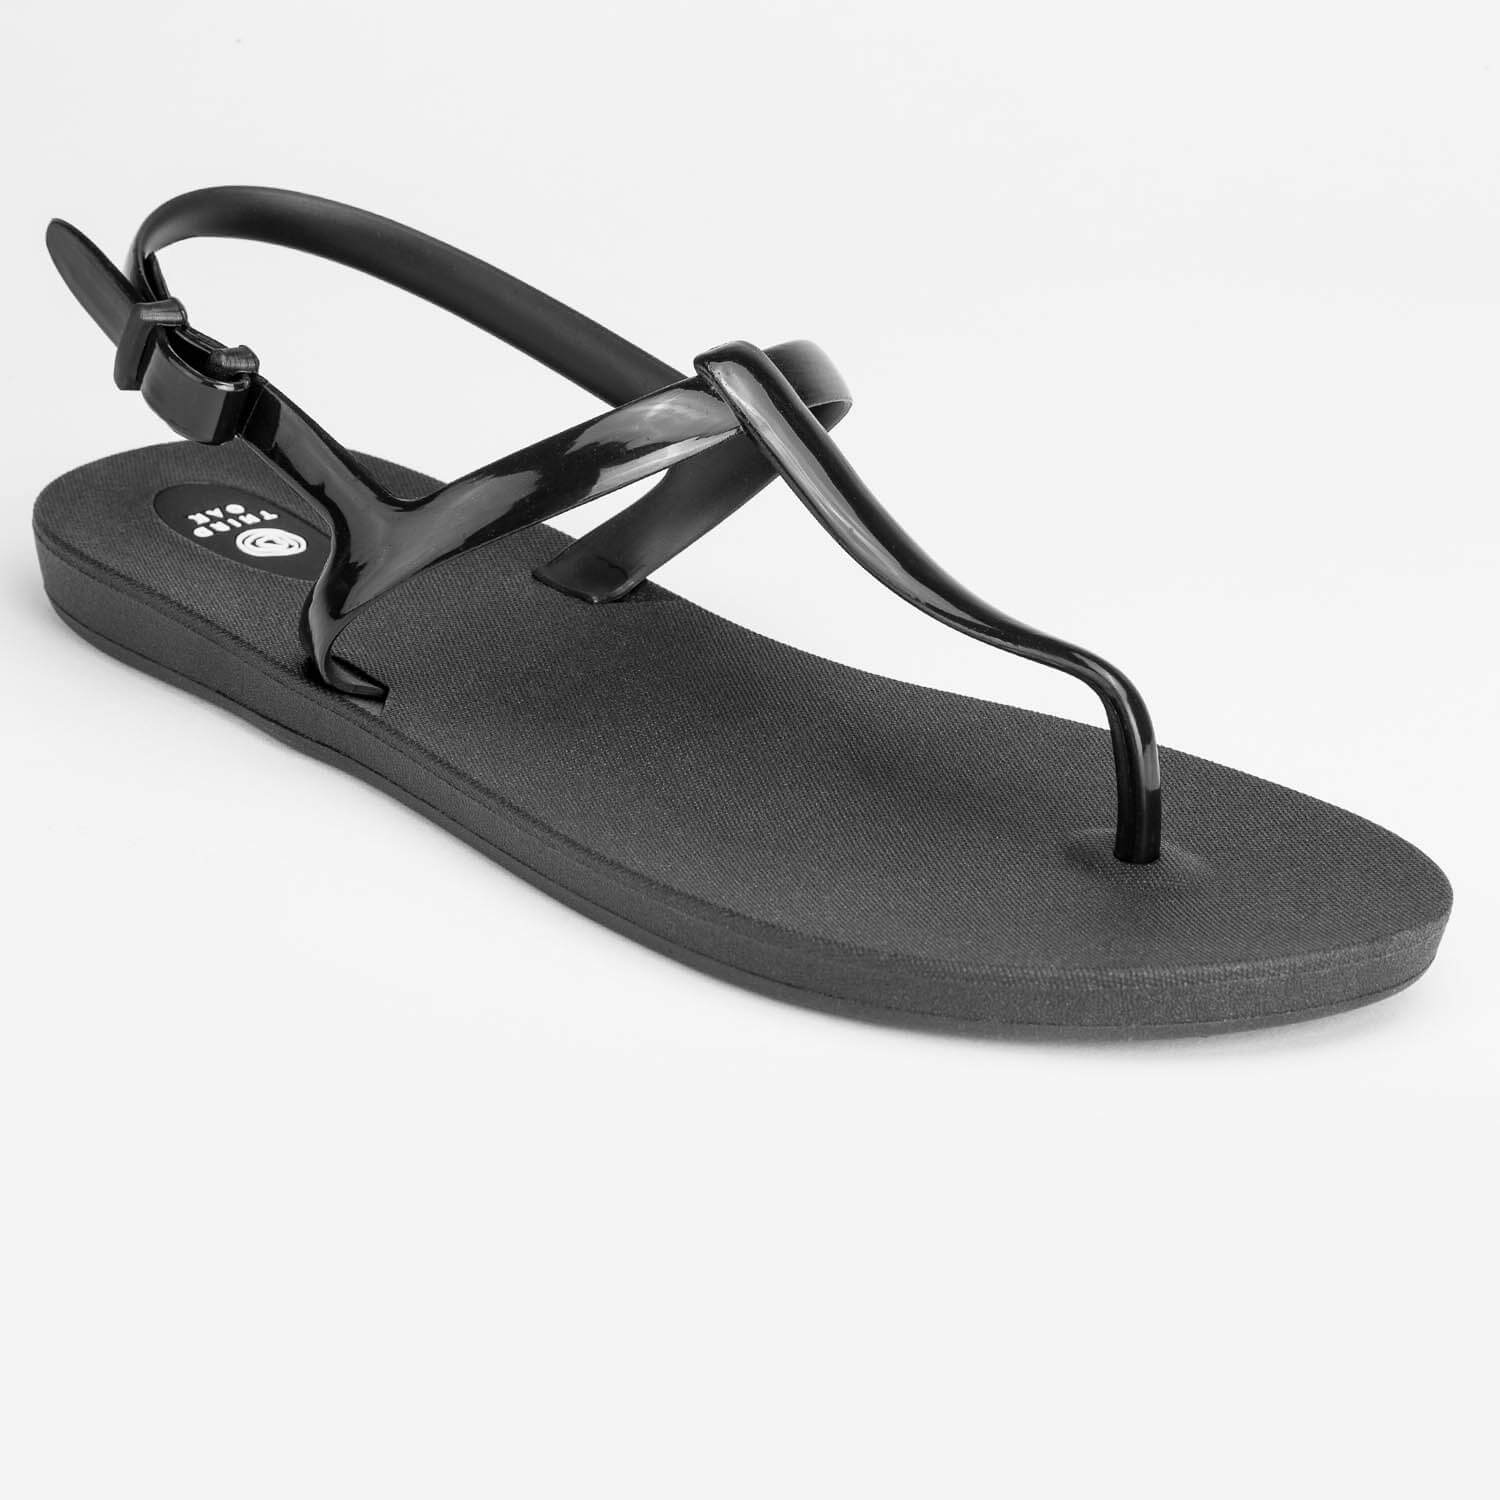 This cute flat thong sandal features a T-strap design, adjustable buckled ankle  strap closure, jelly style, and a … | Sapatos femininos, Sapatos, Pezinhos  femininos